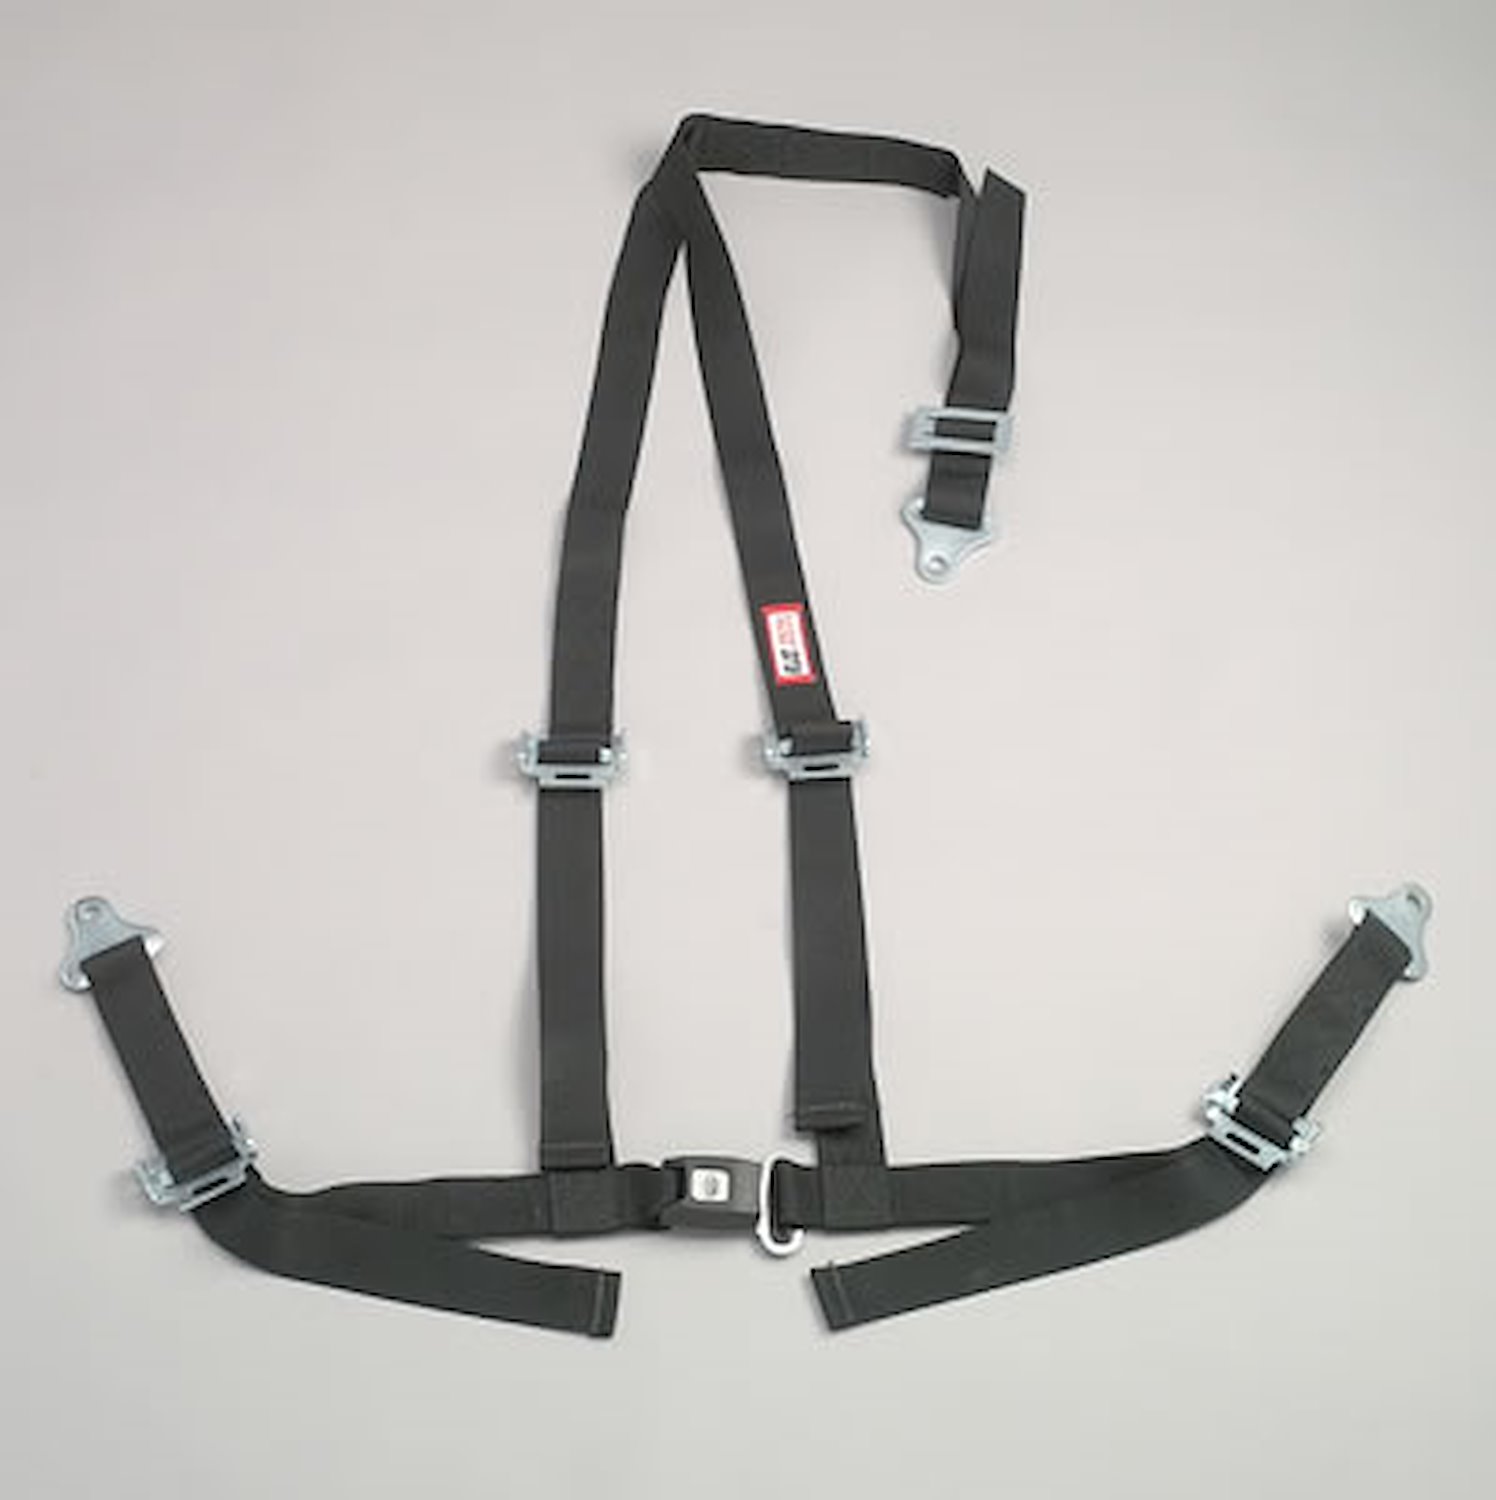 NON-SFI B&T HARNESS 2 PULL DOWN Lap Belt 2 S. H. Individual ROLL BAR Mount ALL WRAP ENDS BLACK